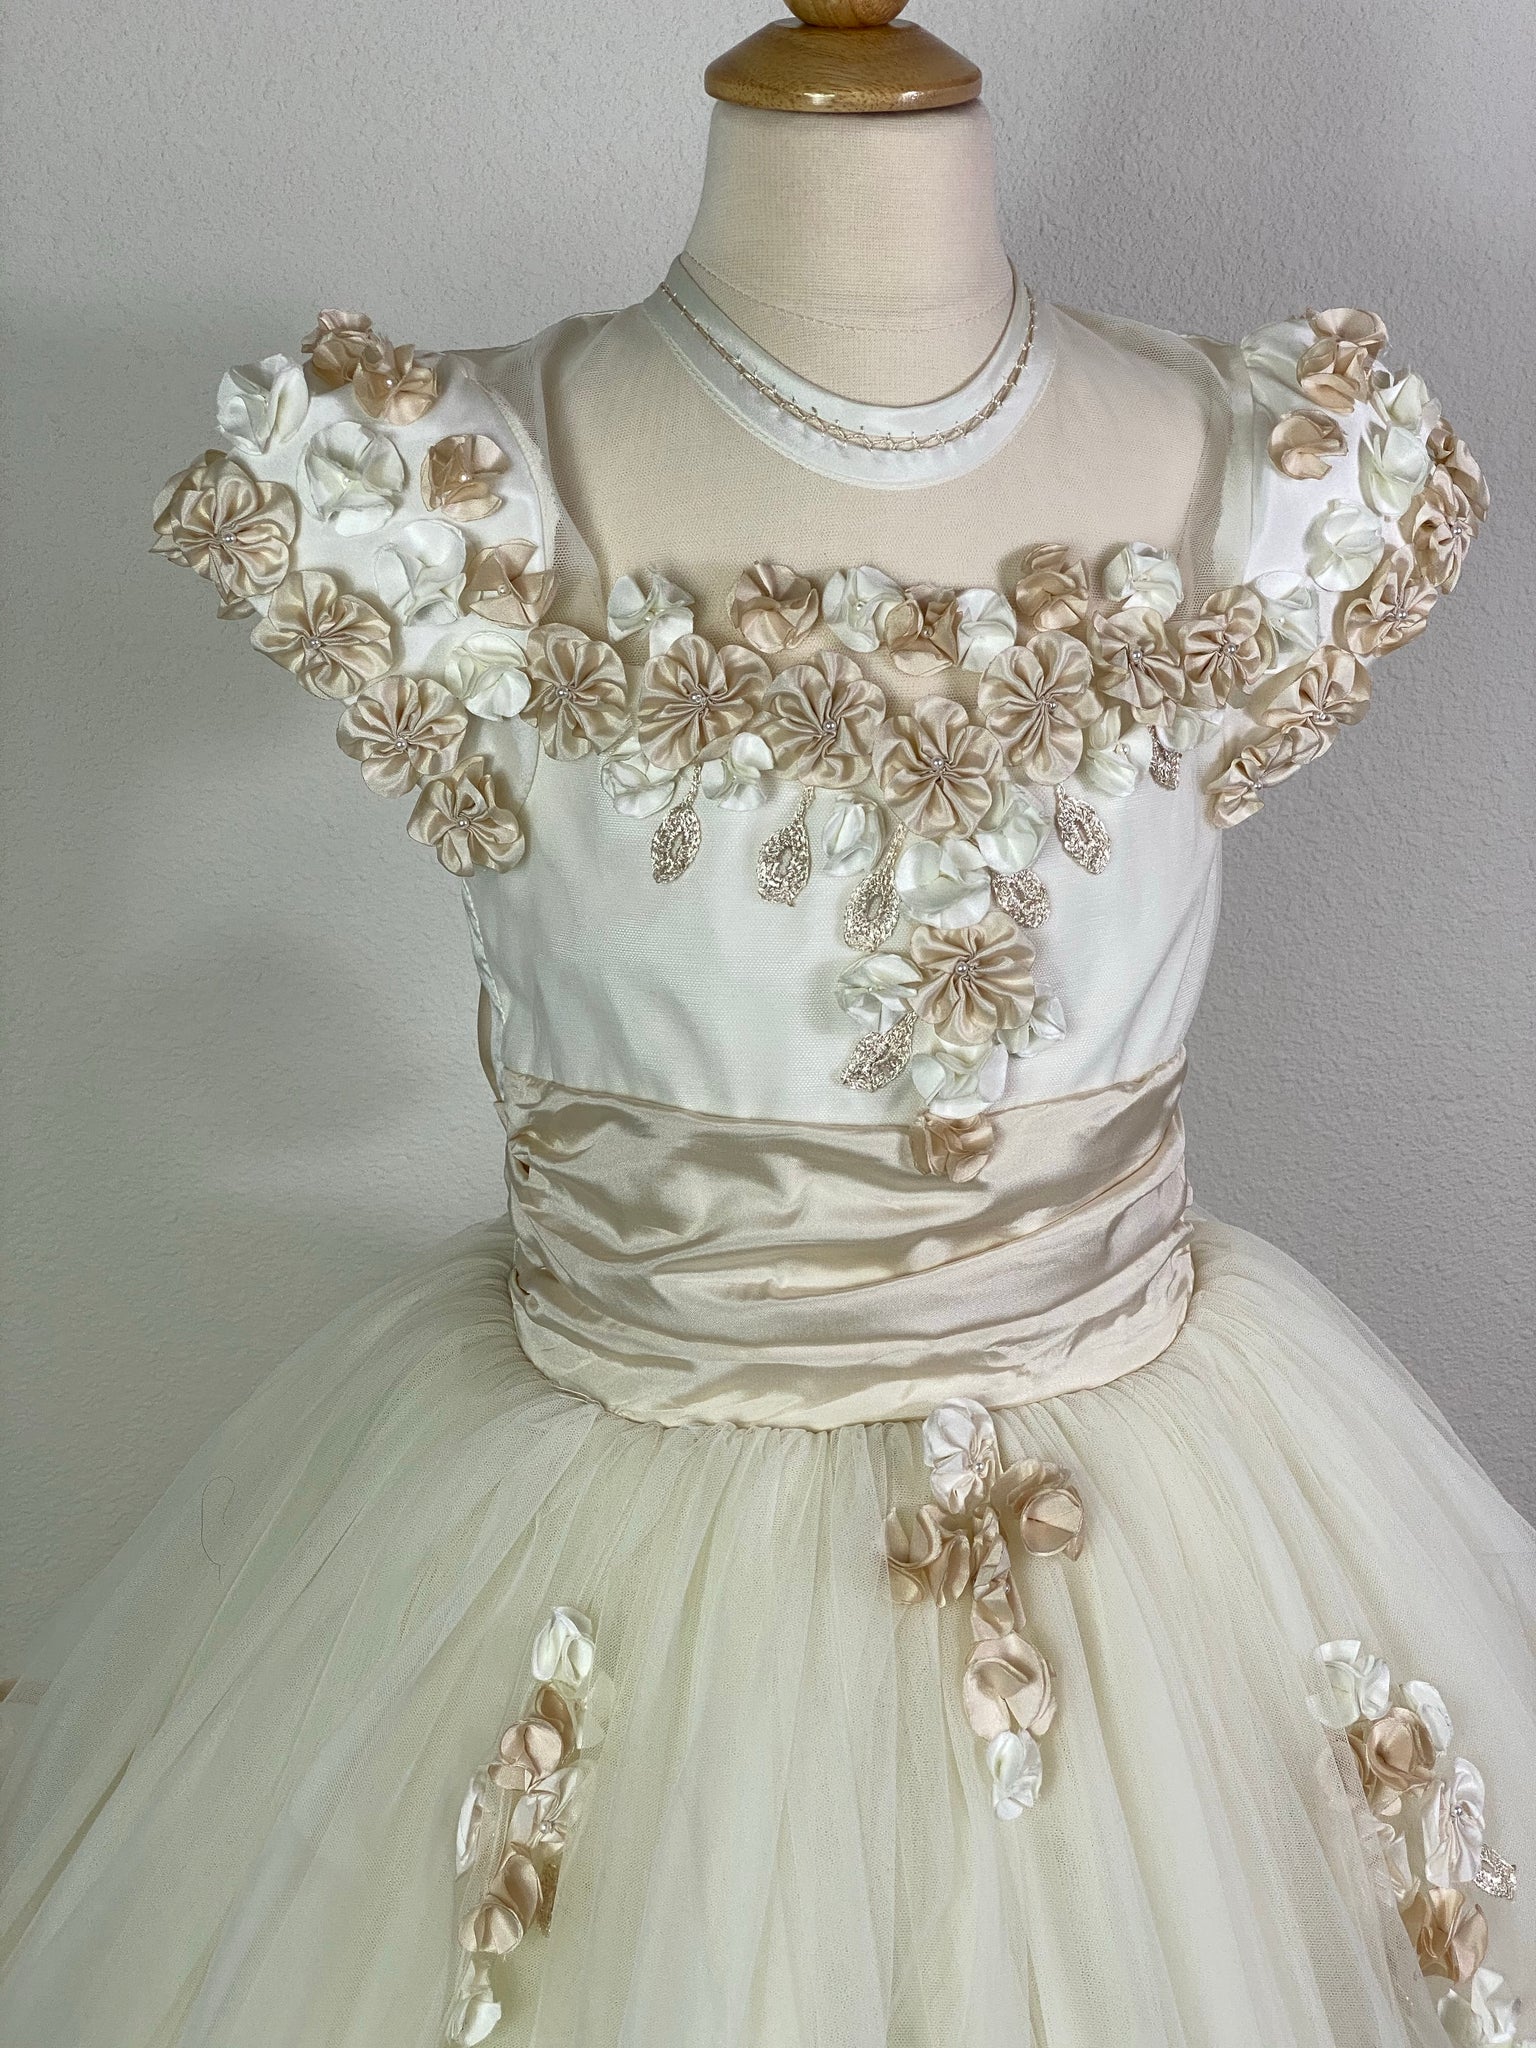 Ivory, size 8 Beige and Ivory floral covered cap sleeve Satin and mesh ivory illusion bodice with flower detailing Beige ruched cummerbund Layered tulle skirt lined with beige satin trim Floral cross detailing below bodice Satin covered button closure Beige ribboning for large bow